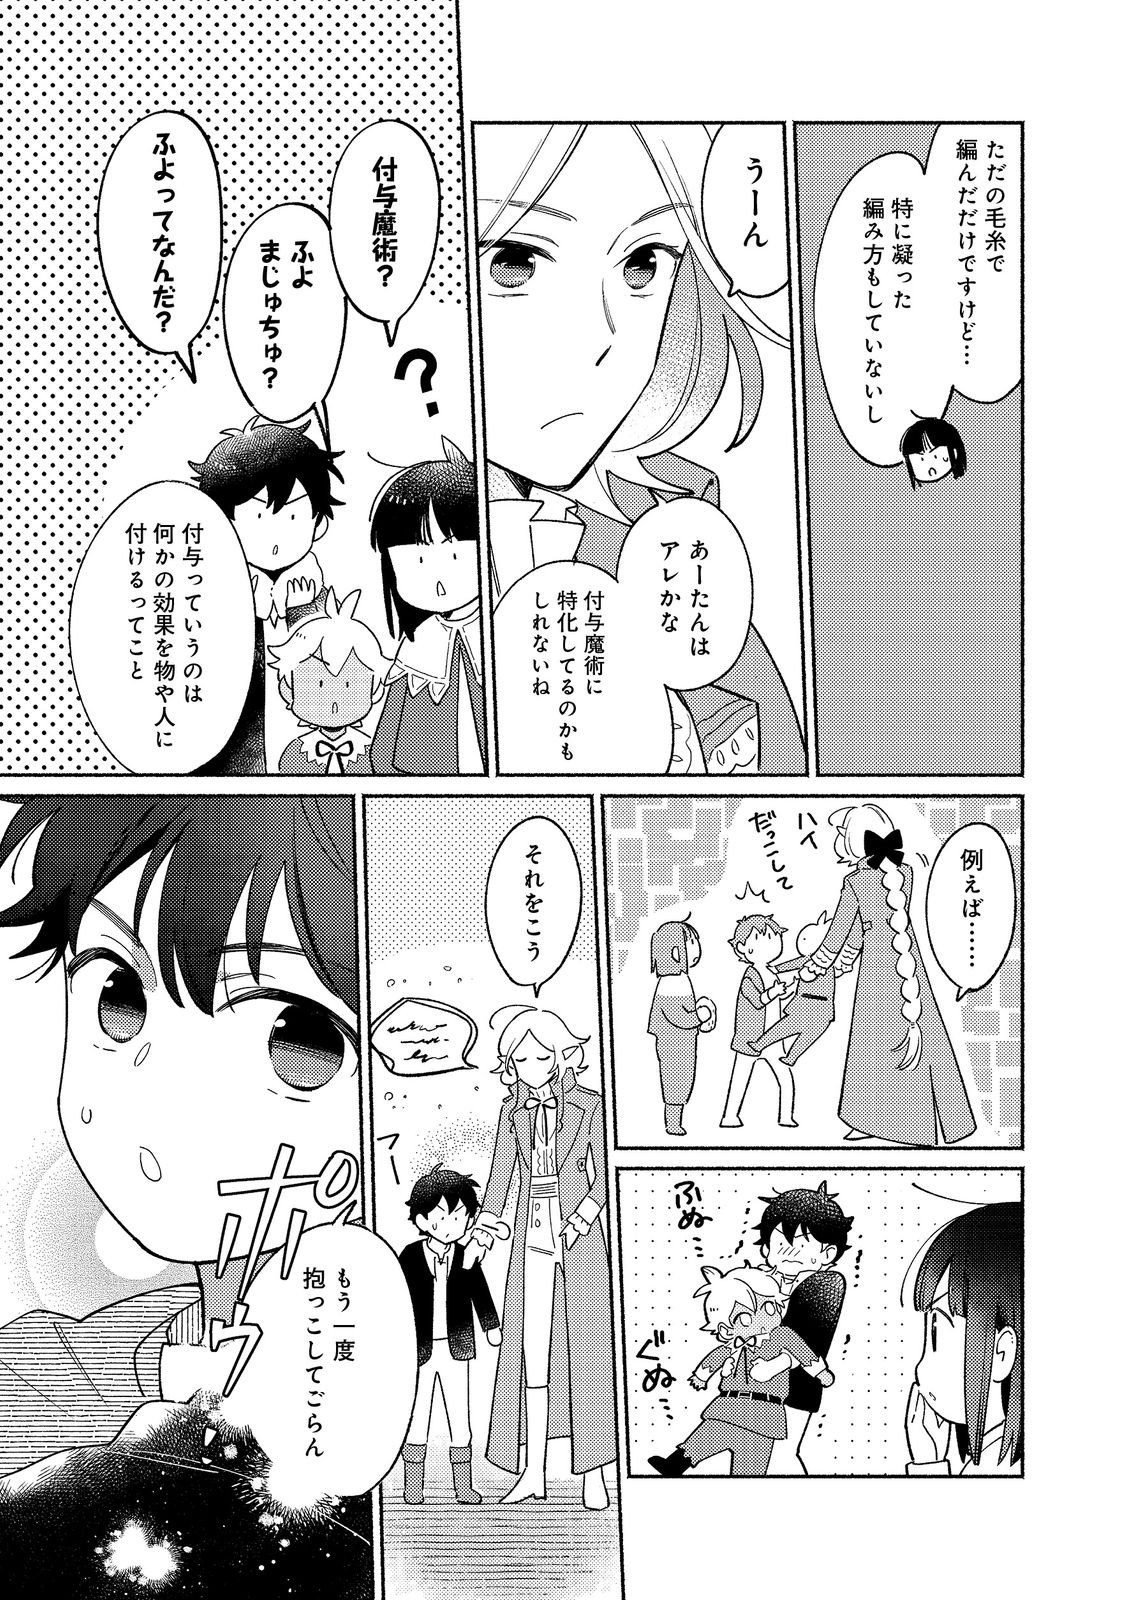 I’m the White Pig Nobleman 第19.1話 - Page 5